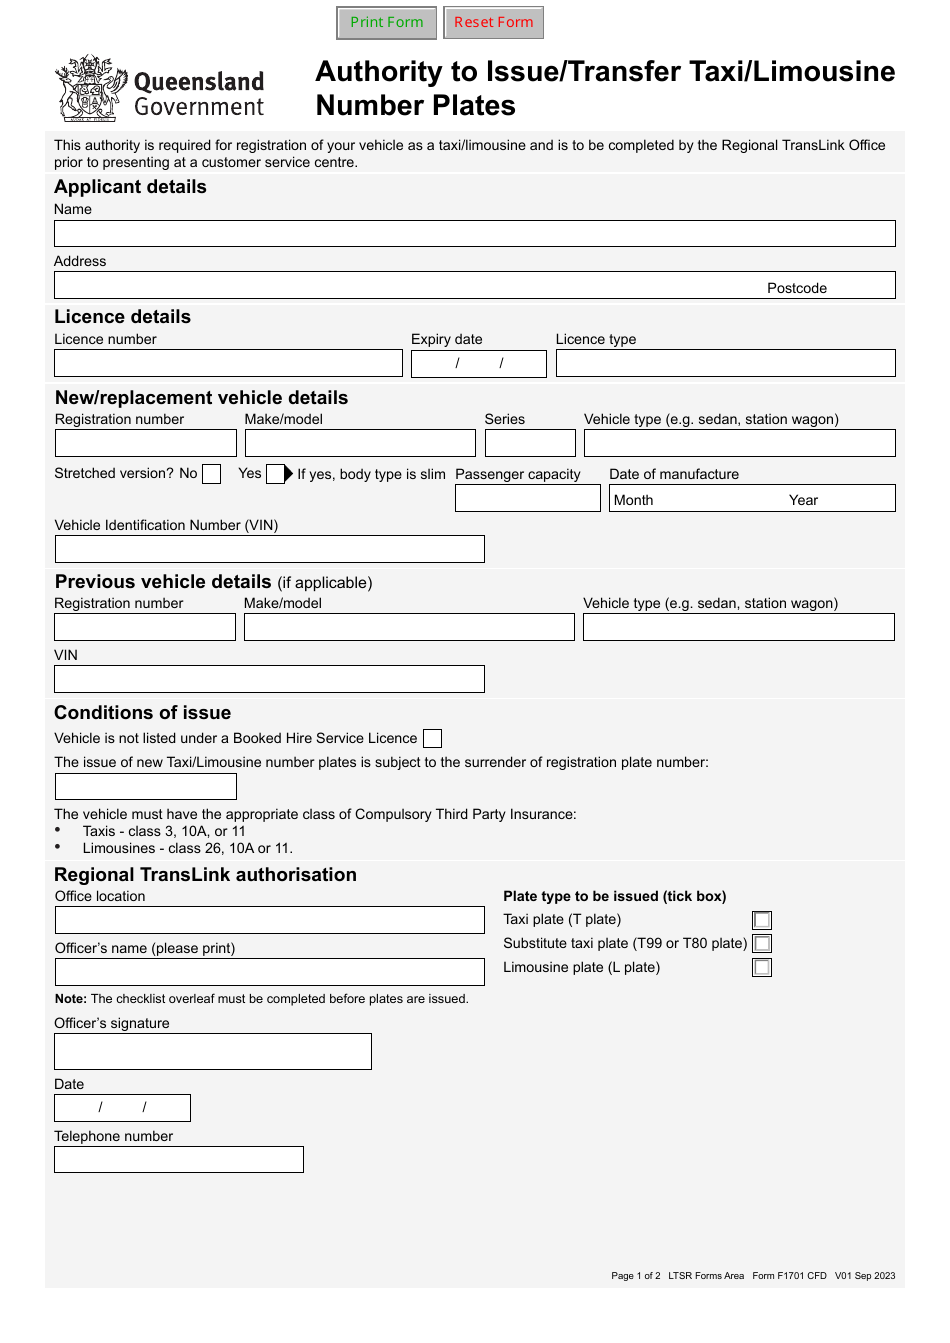 Form F1701 Authority to Issue / Transfer Taxi / Limousine Number Plates - Queensland, Australia, Page 1